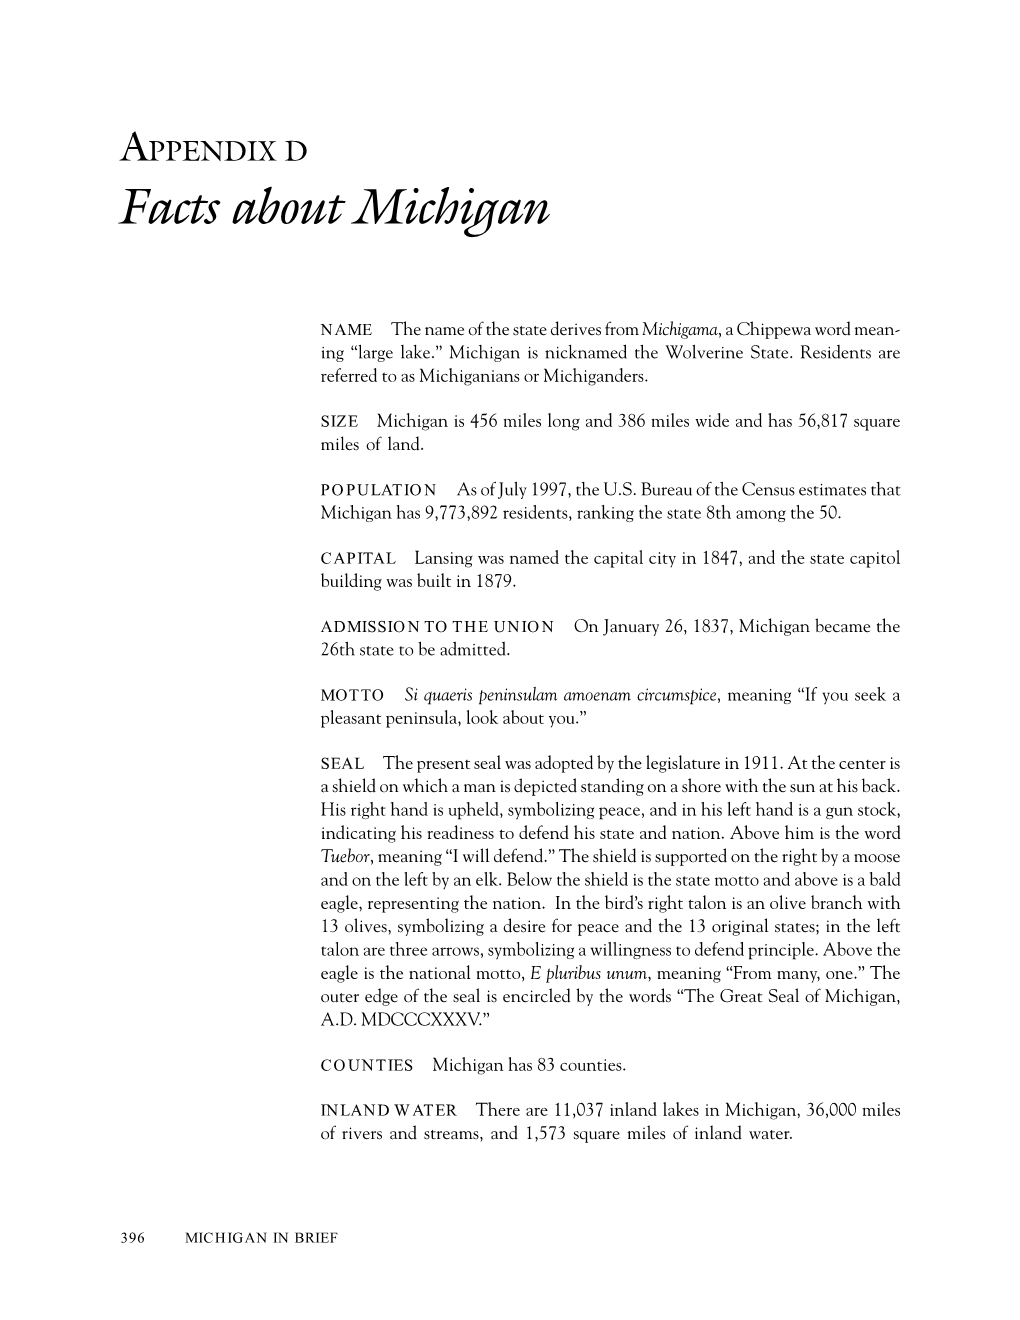 Facts About Michigan